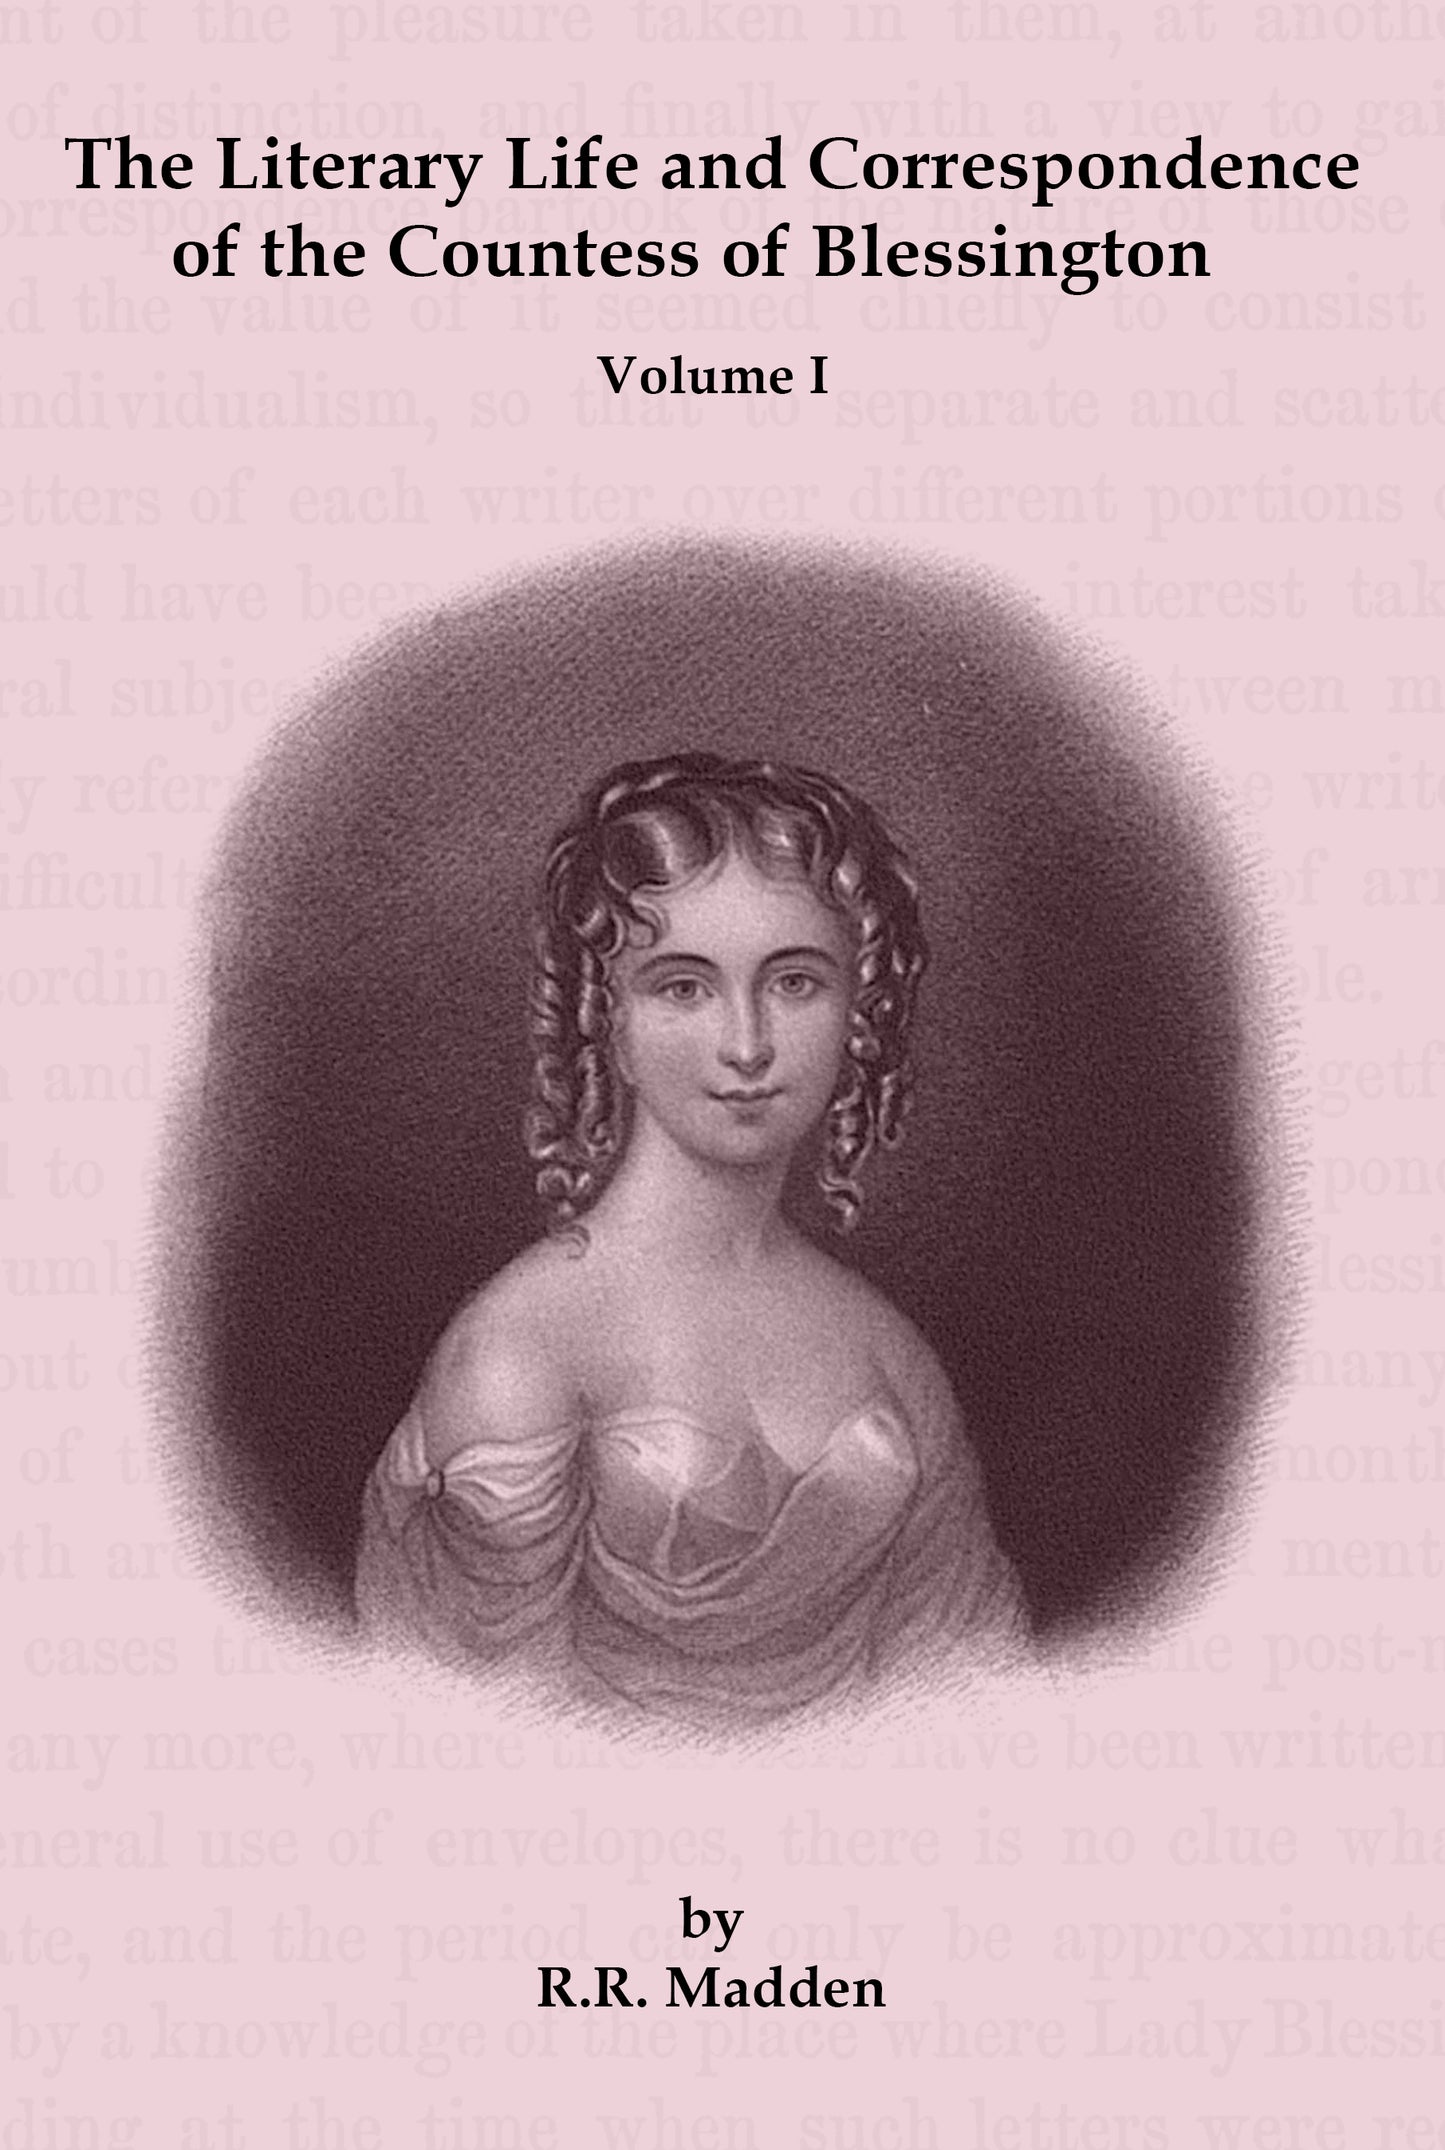 The Literary Life and Correspondence of the Countess of Blessington Volume I